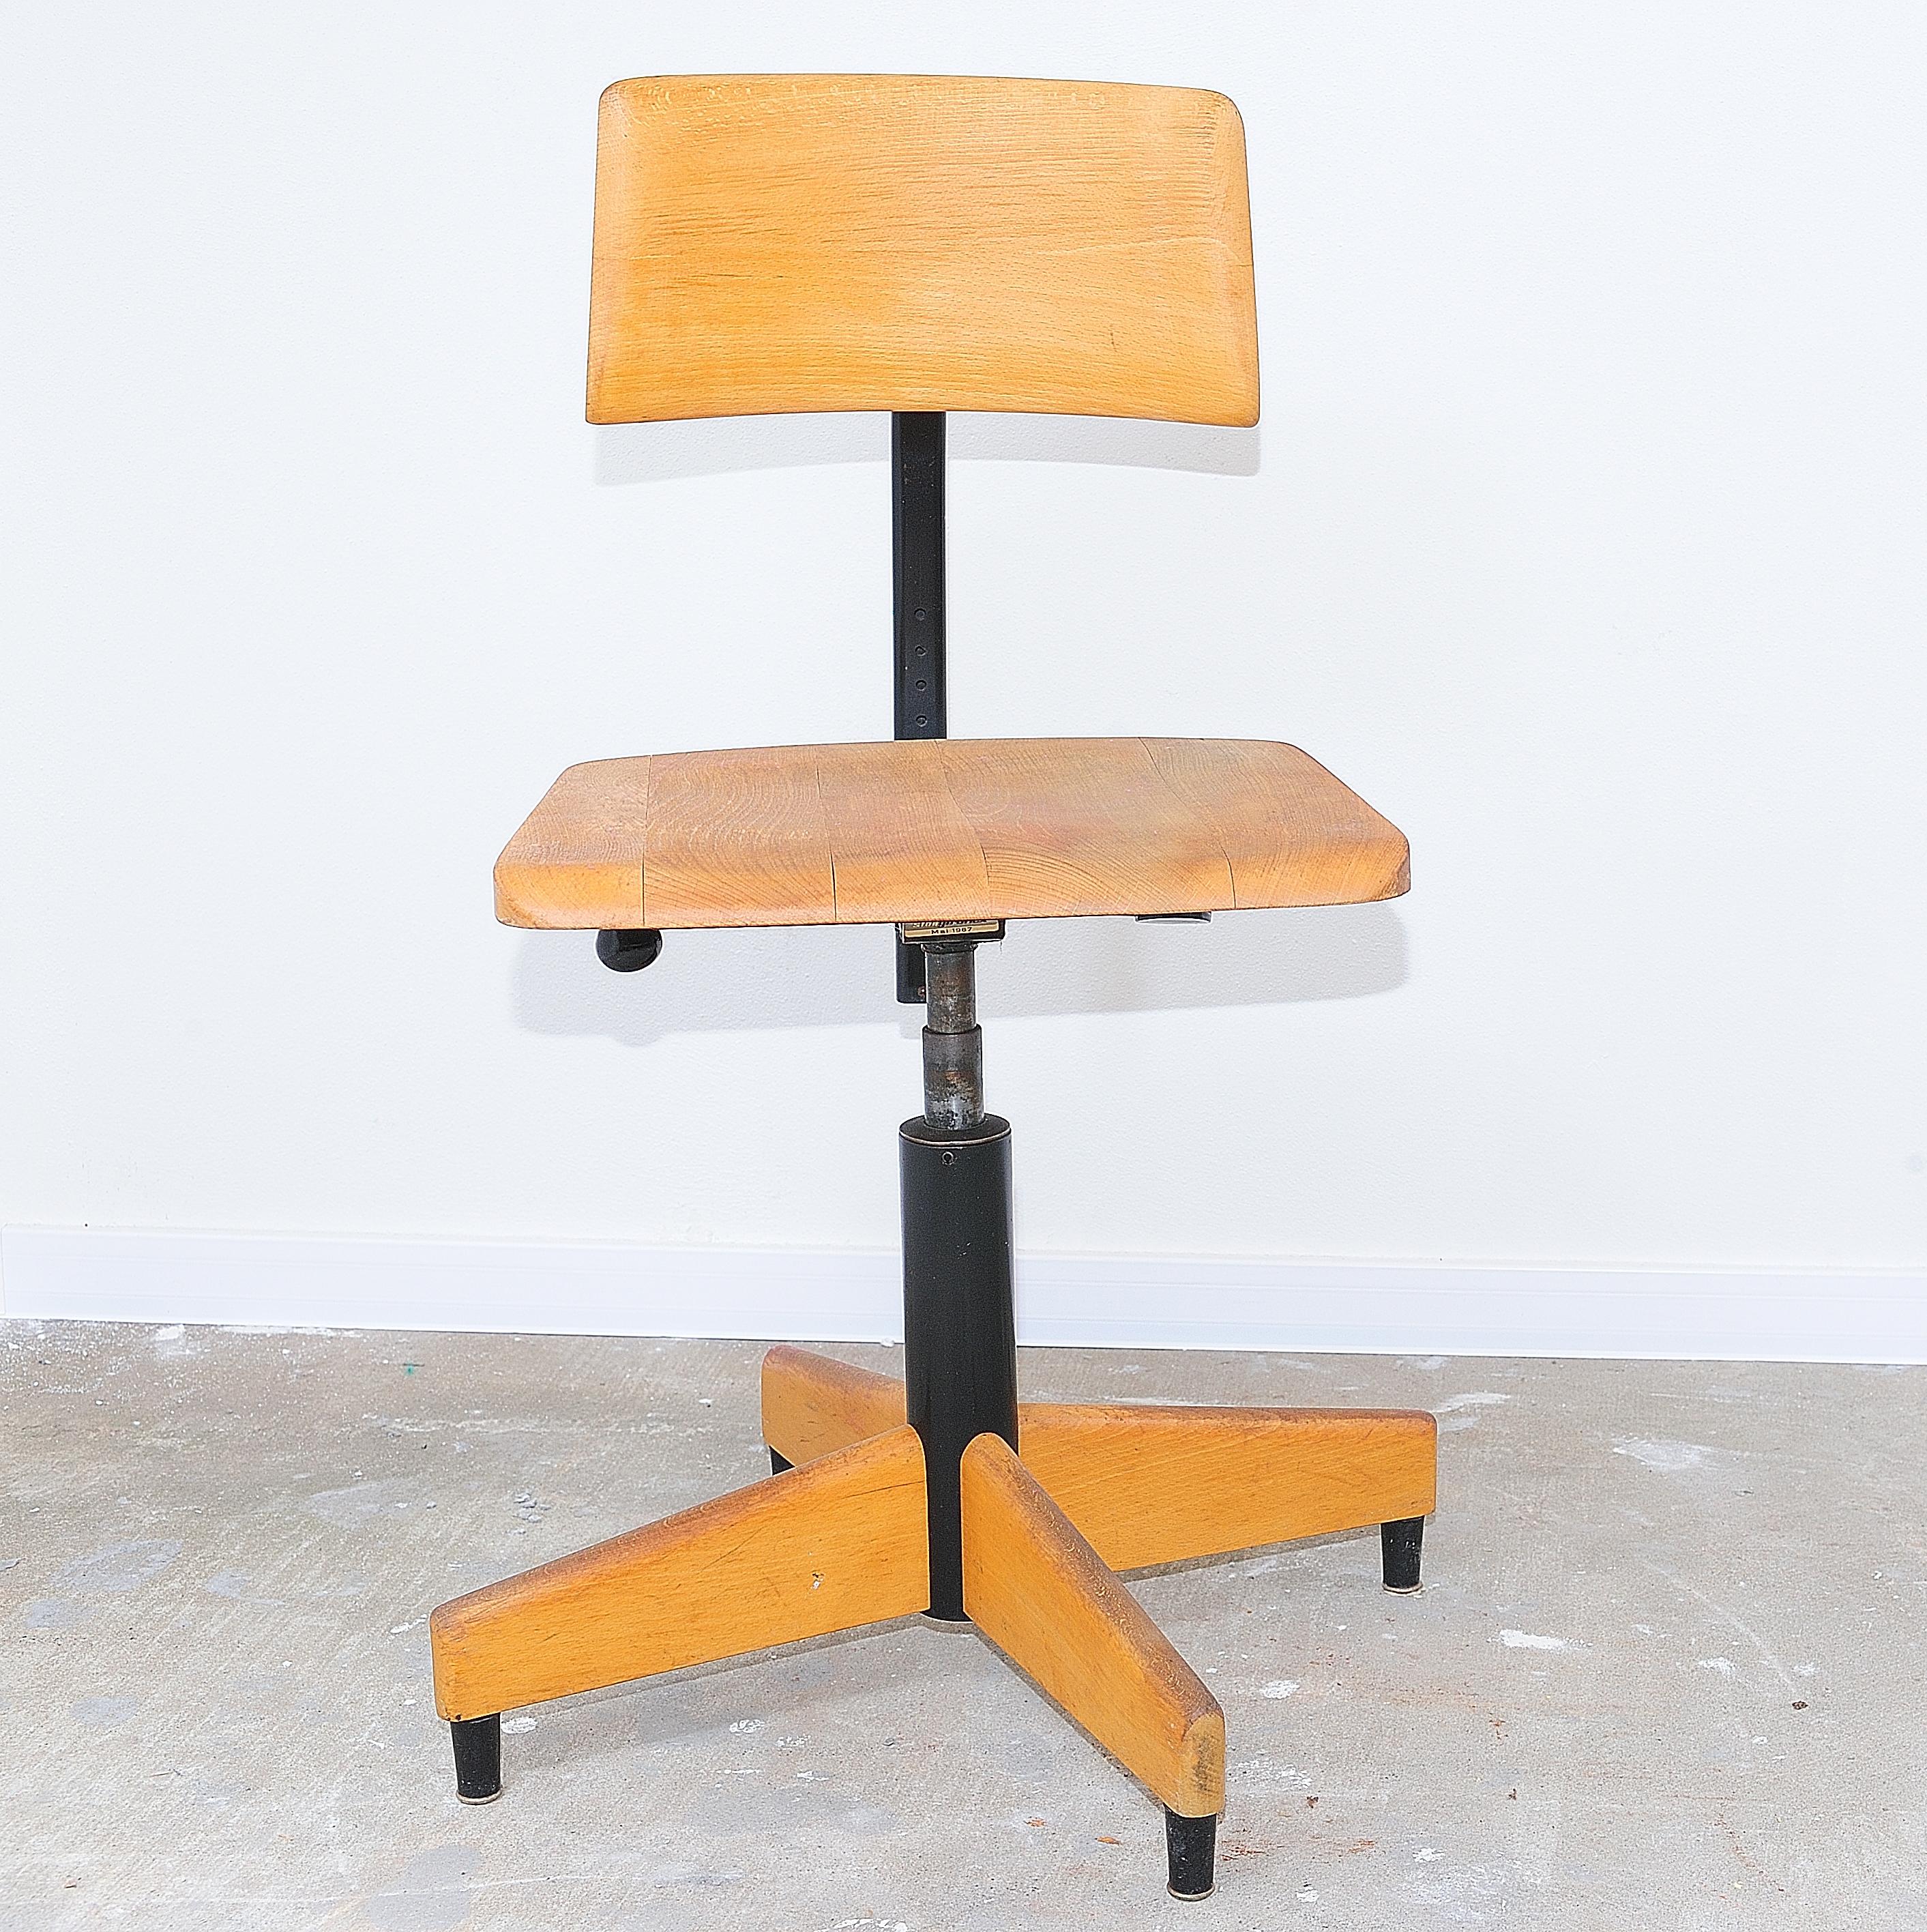 This vintage desk chair was made by Kovona company in the 1970s. Fully functional, adjustable, rotatable. It’s made of iron and beech wood. In good vintage condition, showing slight signs of age and using. The height of the chair is